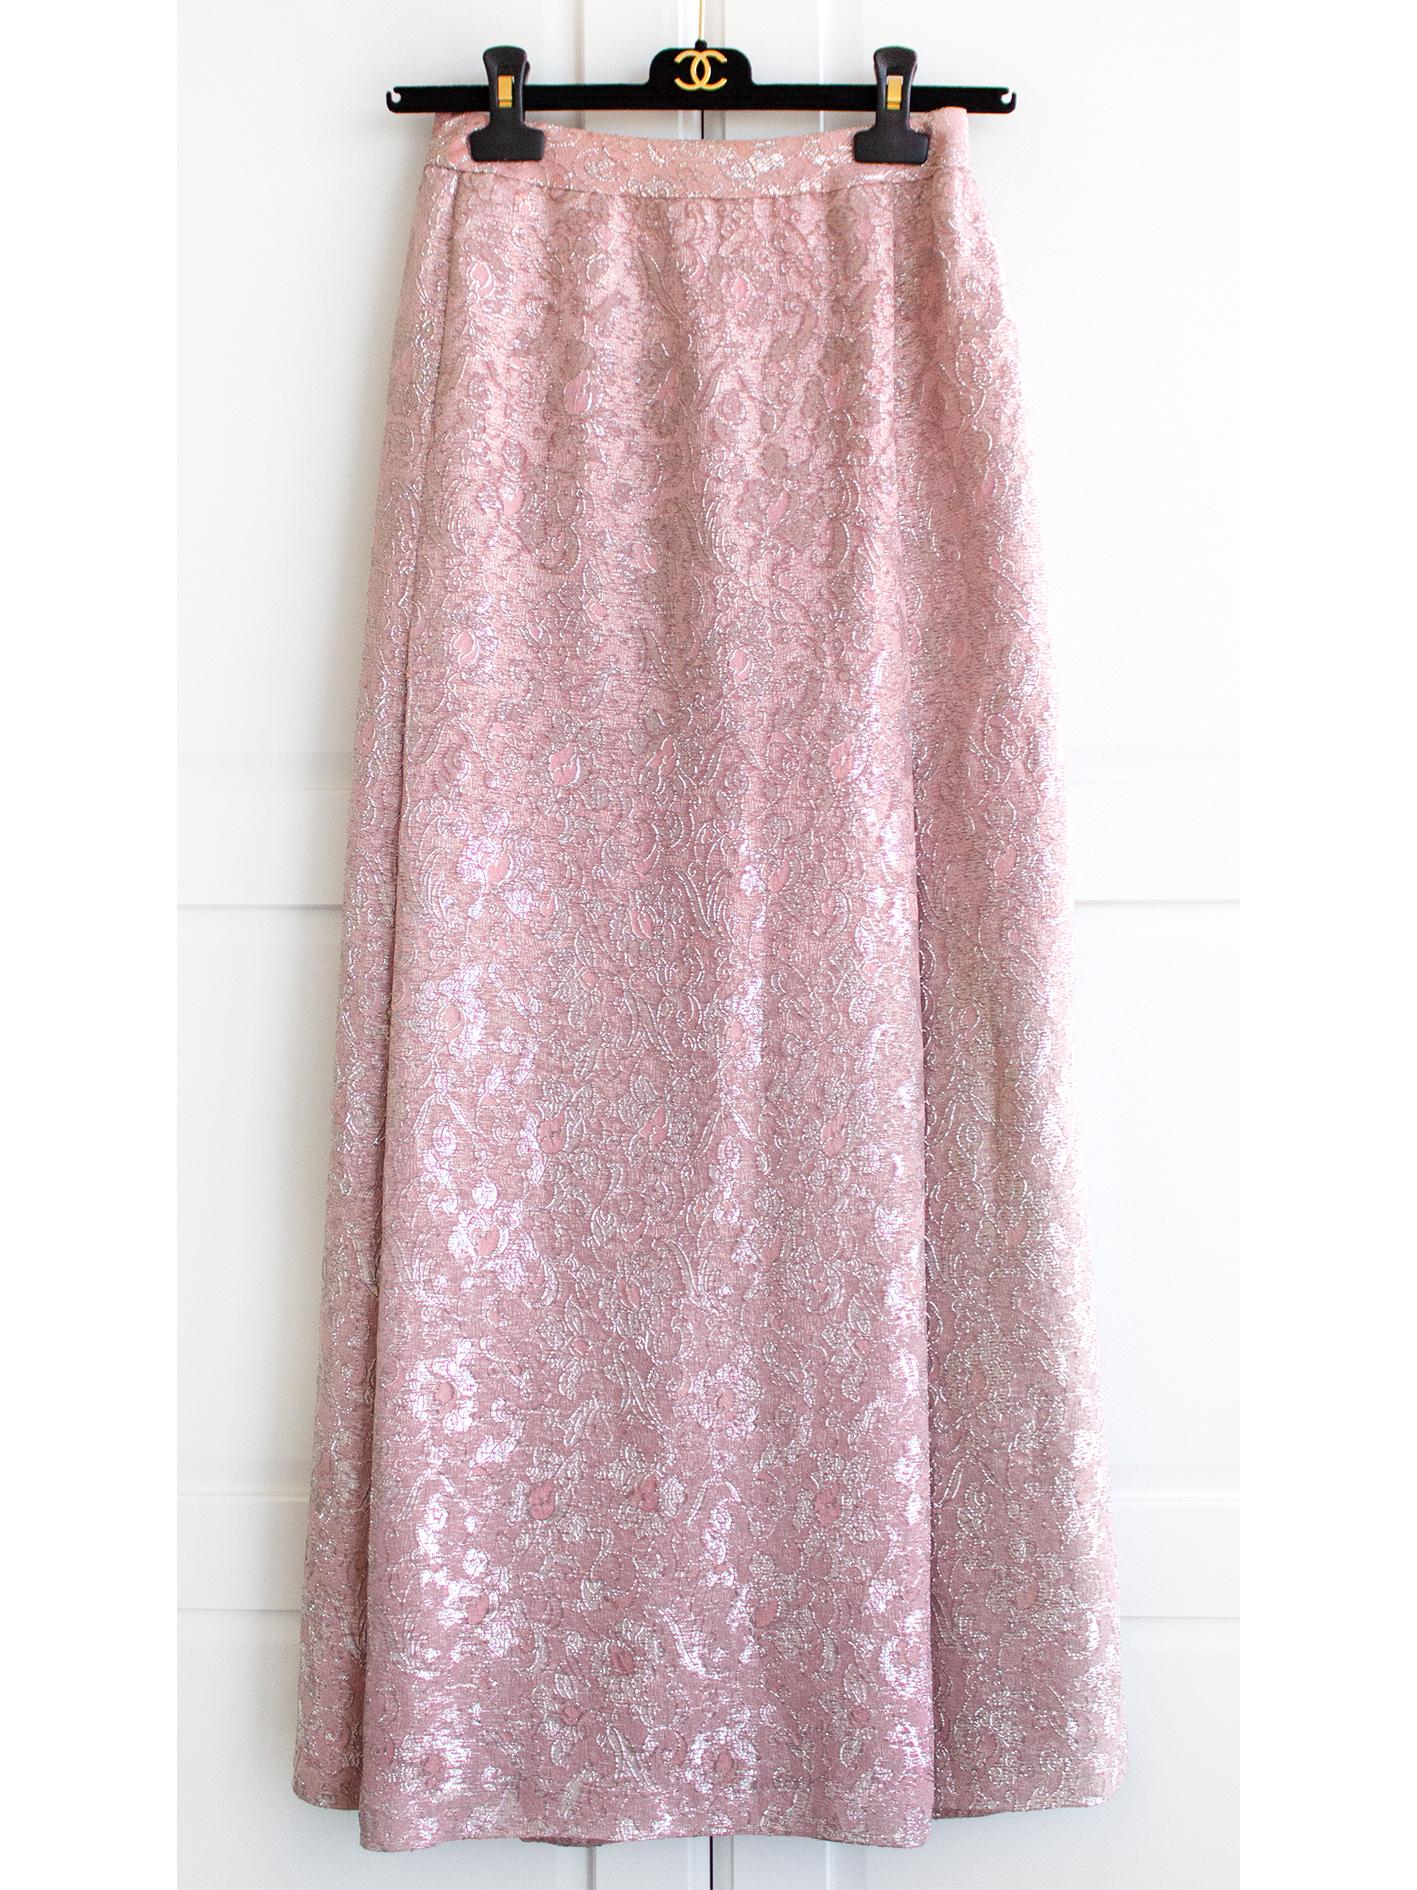 Chanel Vintage Haute Couture 1960s Pink Silver Braided Brocade Jacket Skirt Suit 14